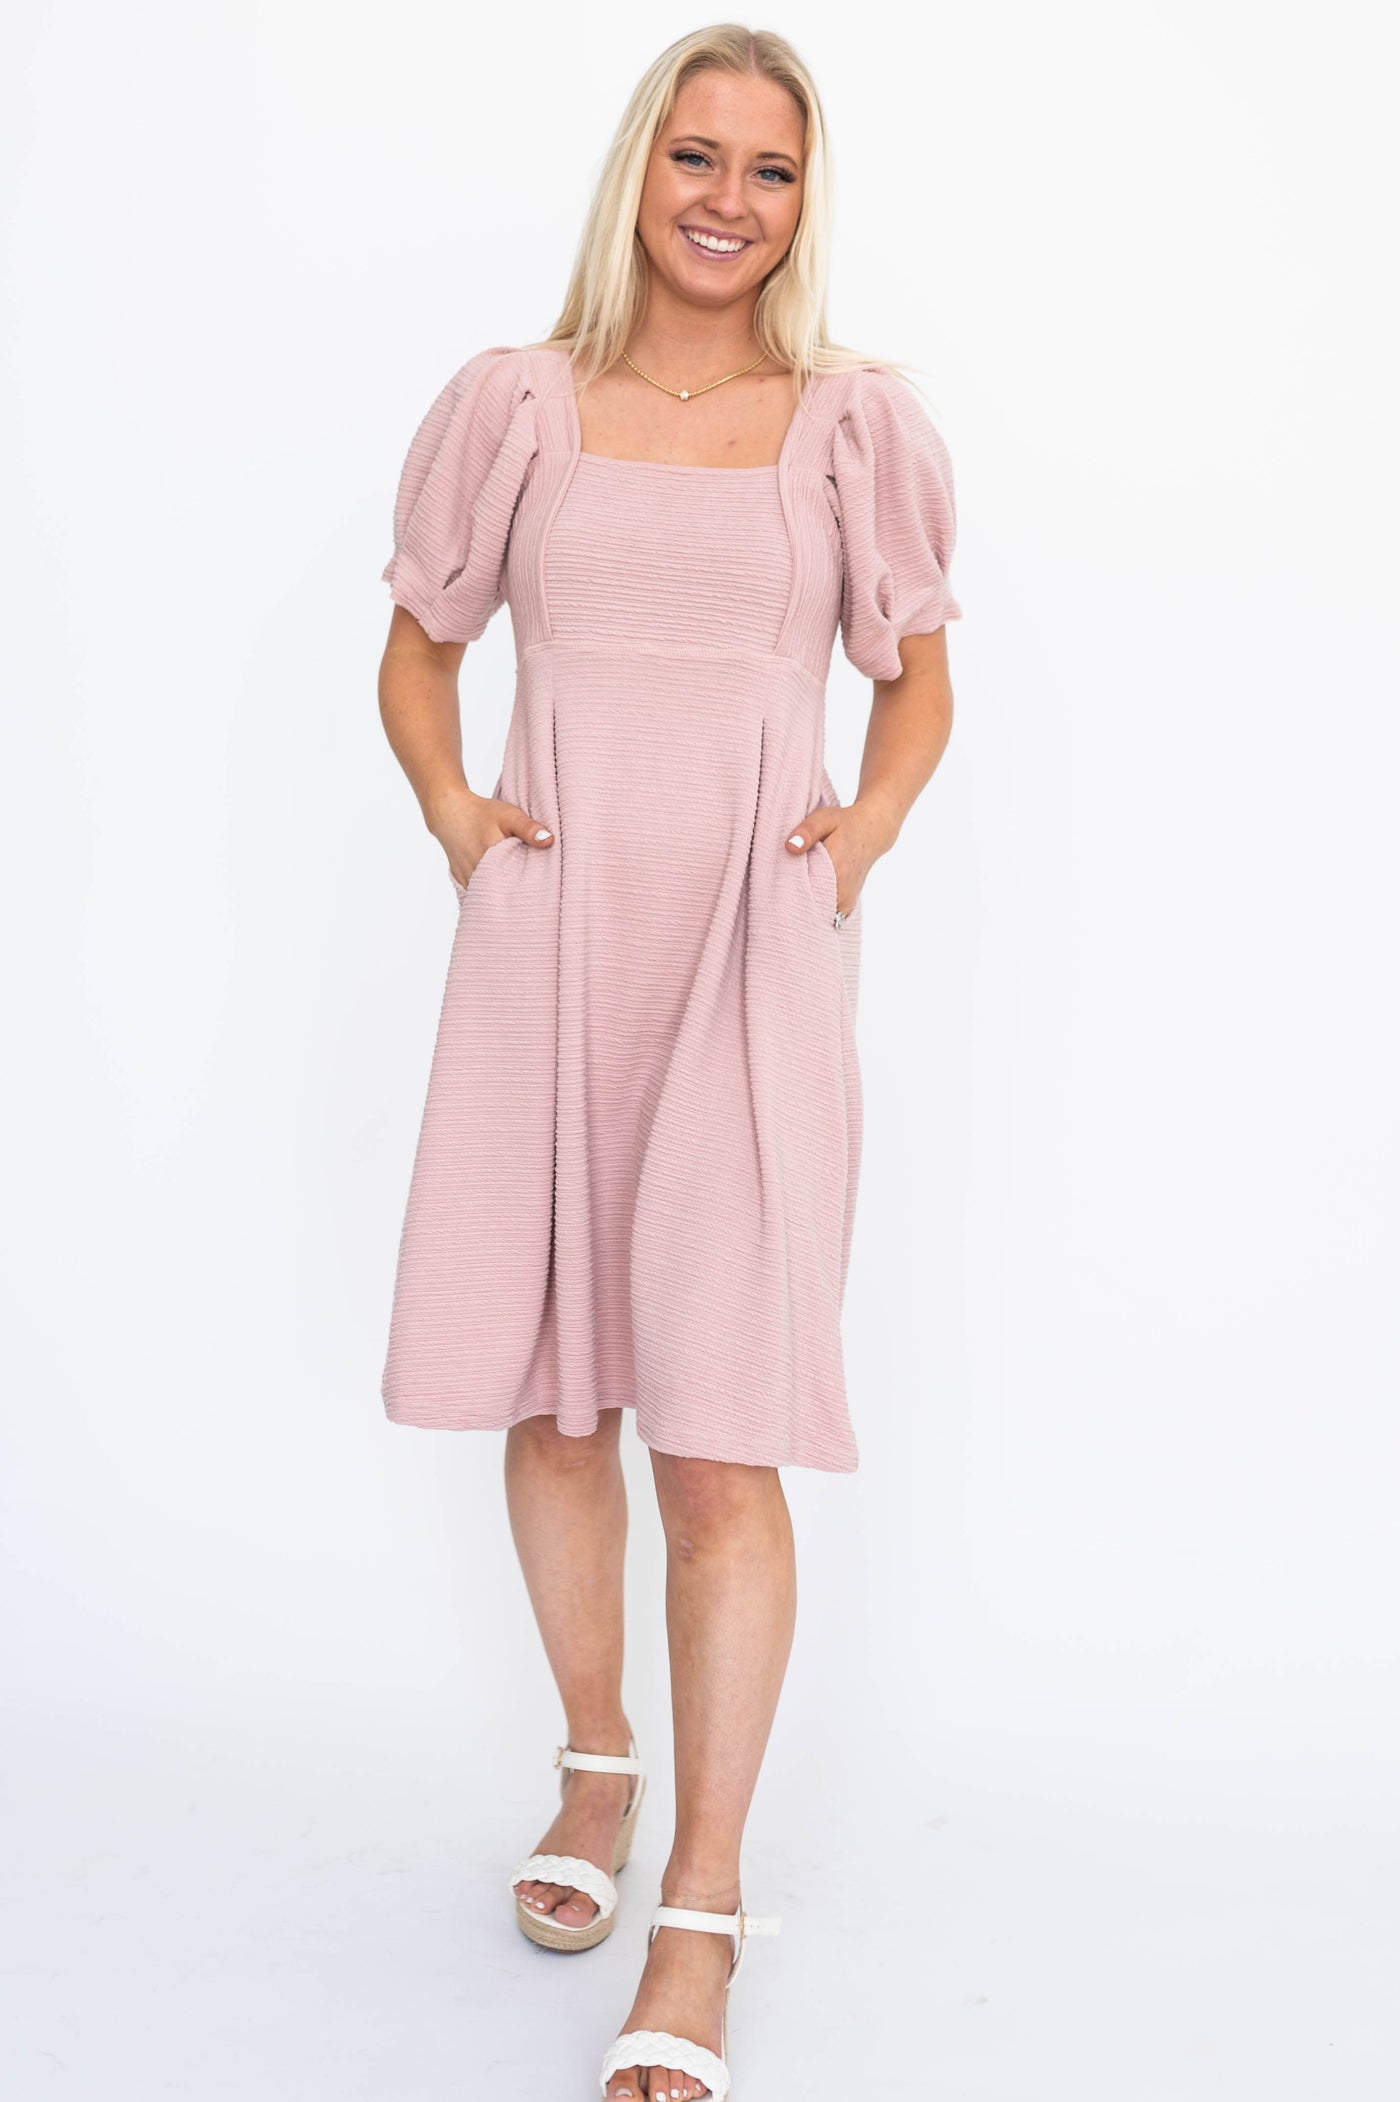 Dusty pink dress with pockets and short sleeves